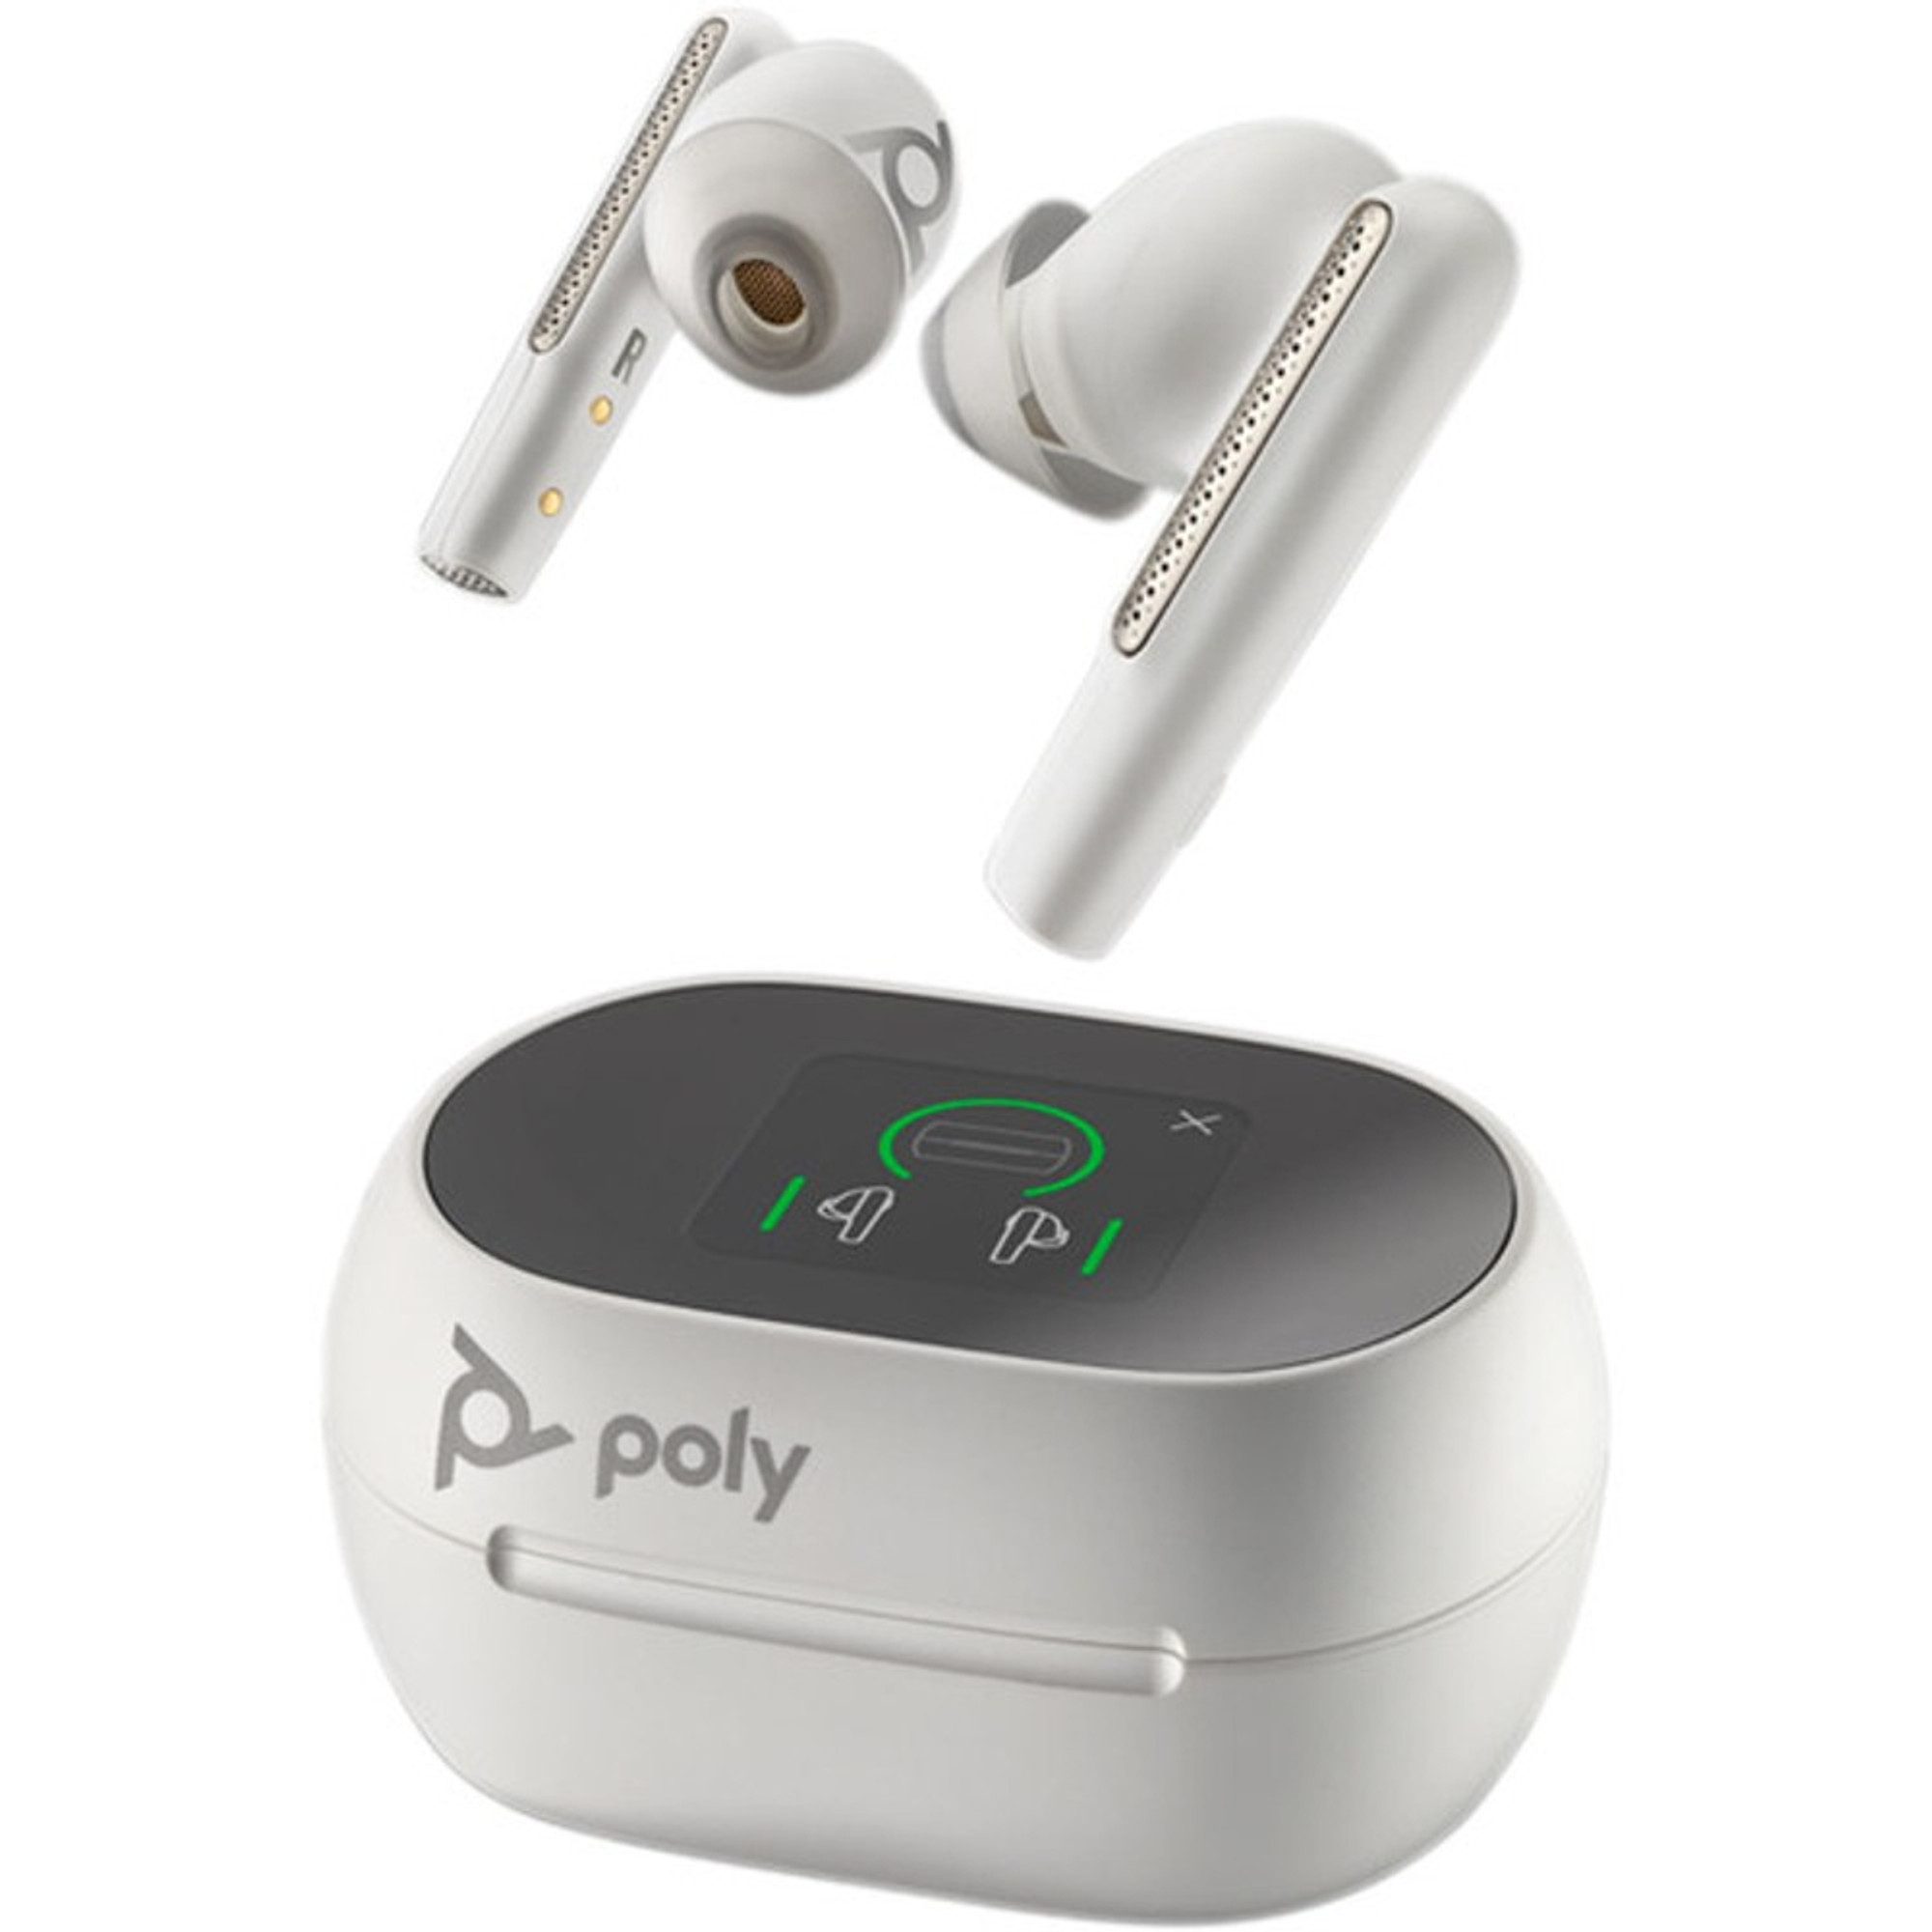 Touchscreen Earbuds USB-A, Plantronics (216754-01 Charging HEADPHONES Poly 60+ Poly | Free Free Headsets | 7Y8G5AA) Voyager Voyager Poly Singapore With Plantronics Plantronics | (White) 60+ UC Case Wireless | / Poly True Plantronics